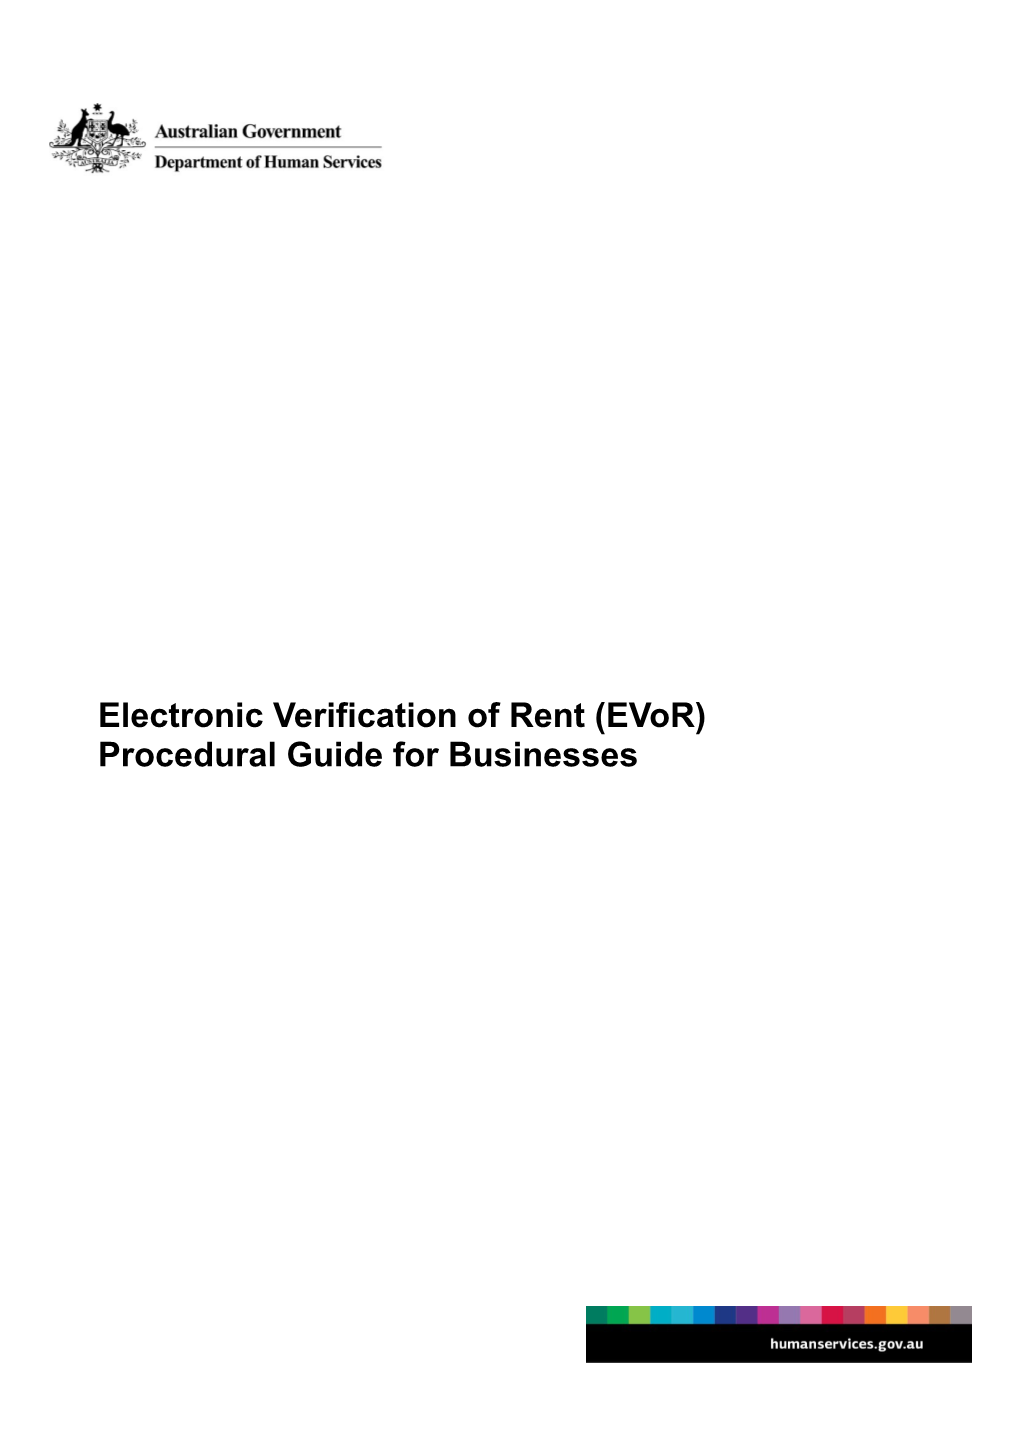 Electronic Verification of Rent (Evor) Procedural Guide for Businesses